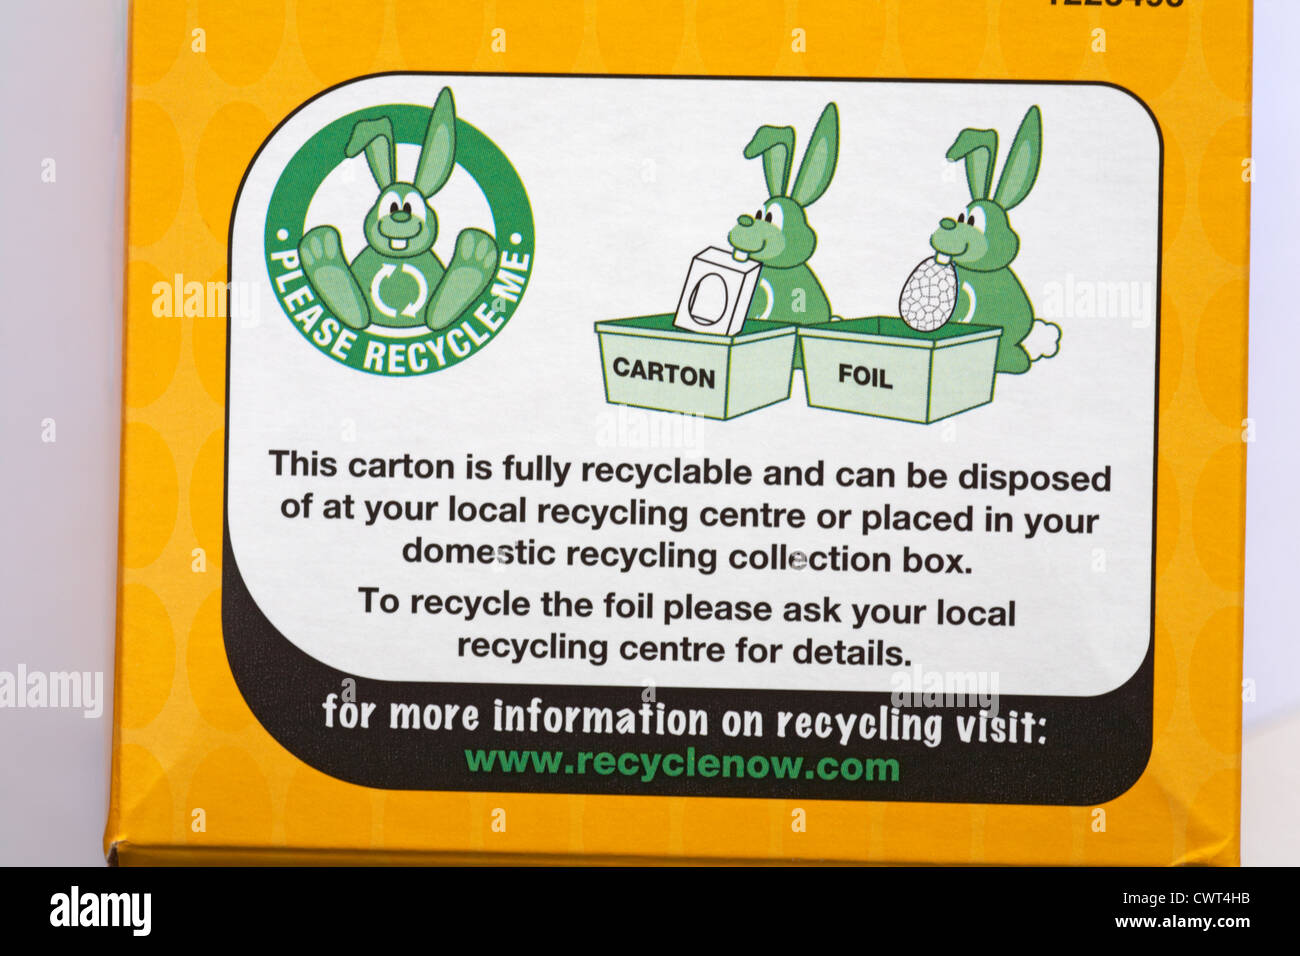 Please recycle me carton and foil information on Easter egg carton - disposal recycling recycle logo symbol Stock Photo